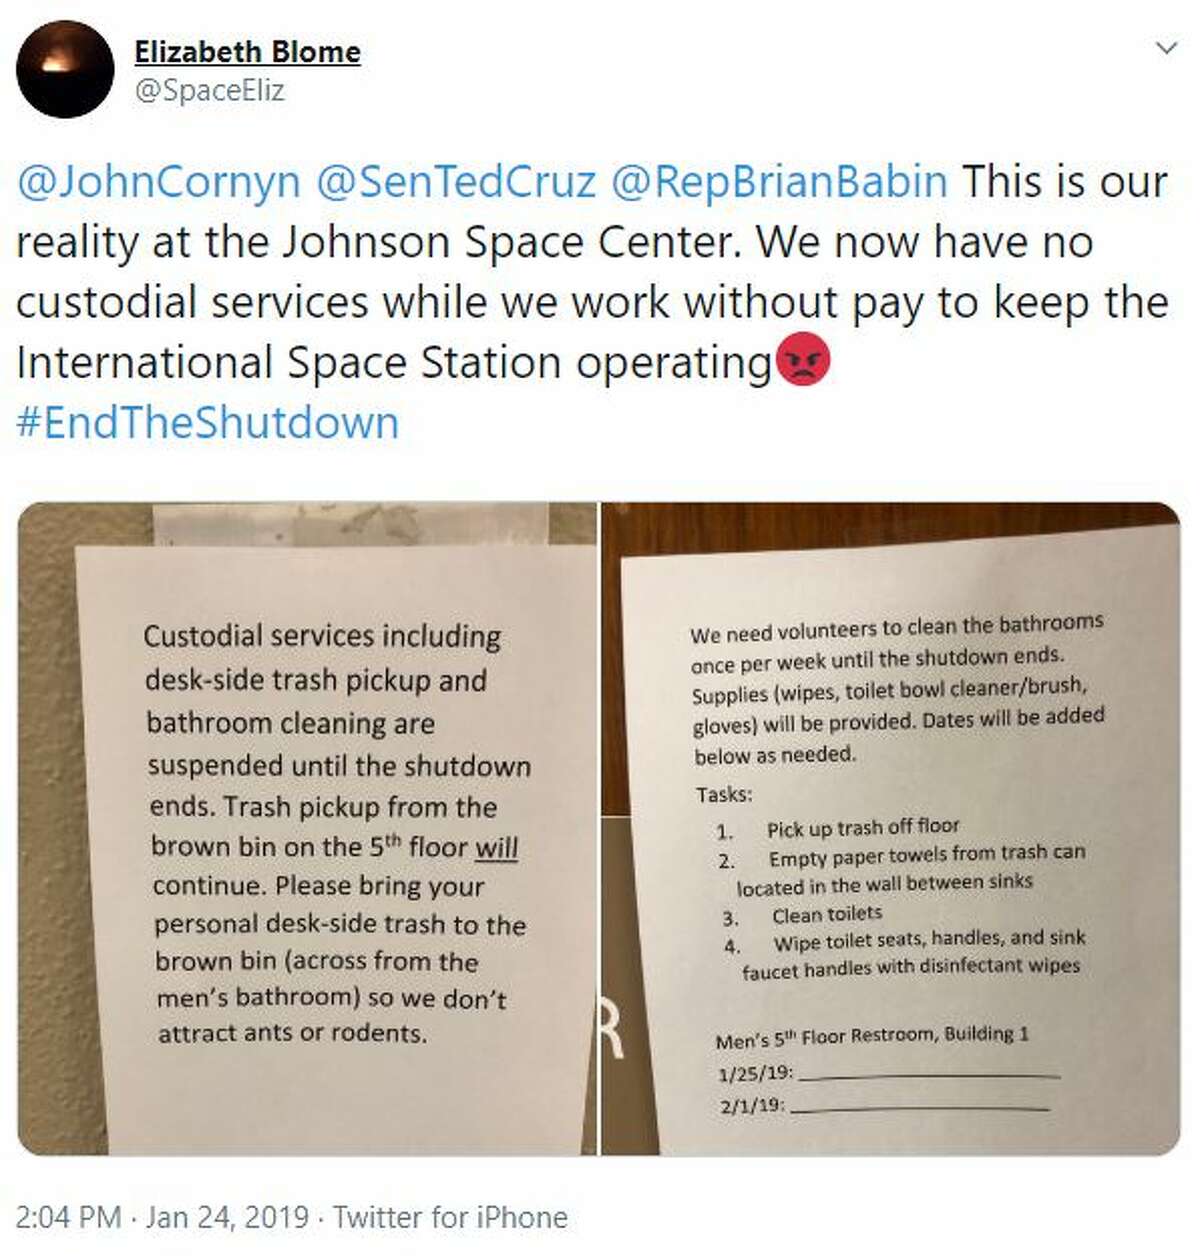 "This is our reality at the Johnson Space Center. We now have no custodial services while we work without pay to keep the International Space Station operating #EndTheShutdown"